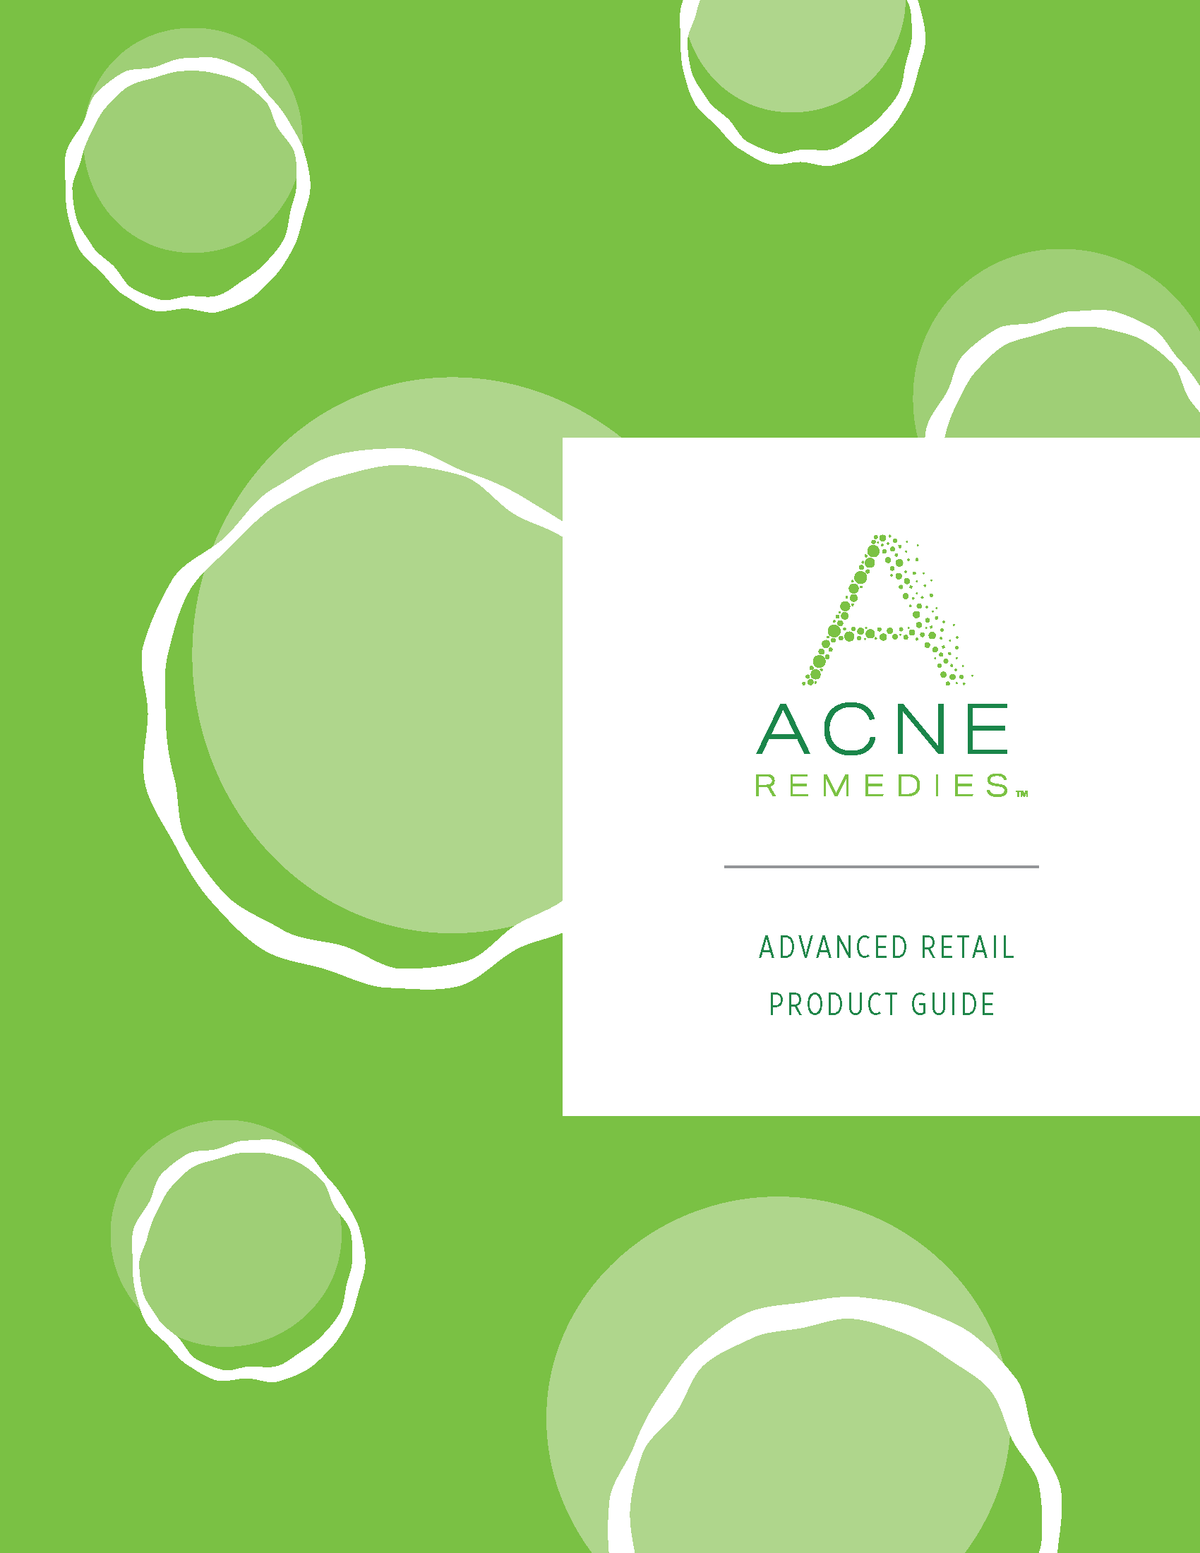 Acne Remedies - Advanced Retail Product Guides